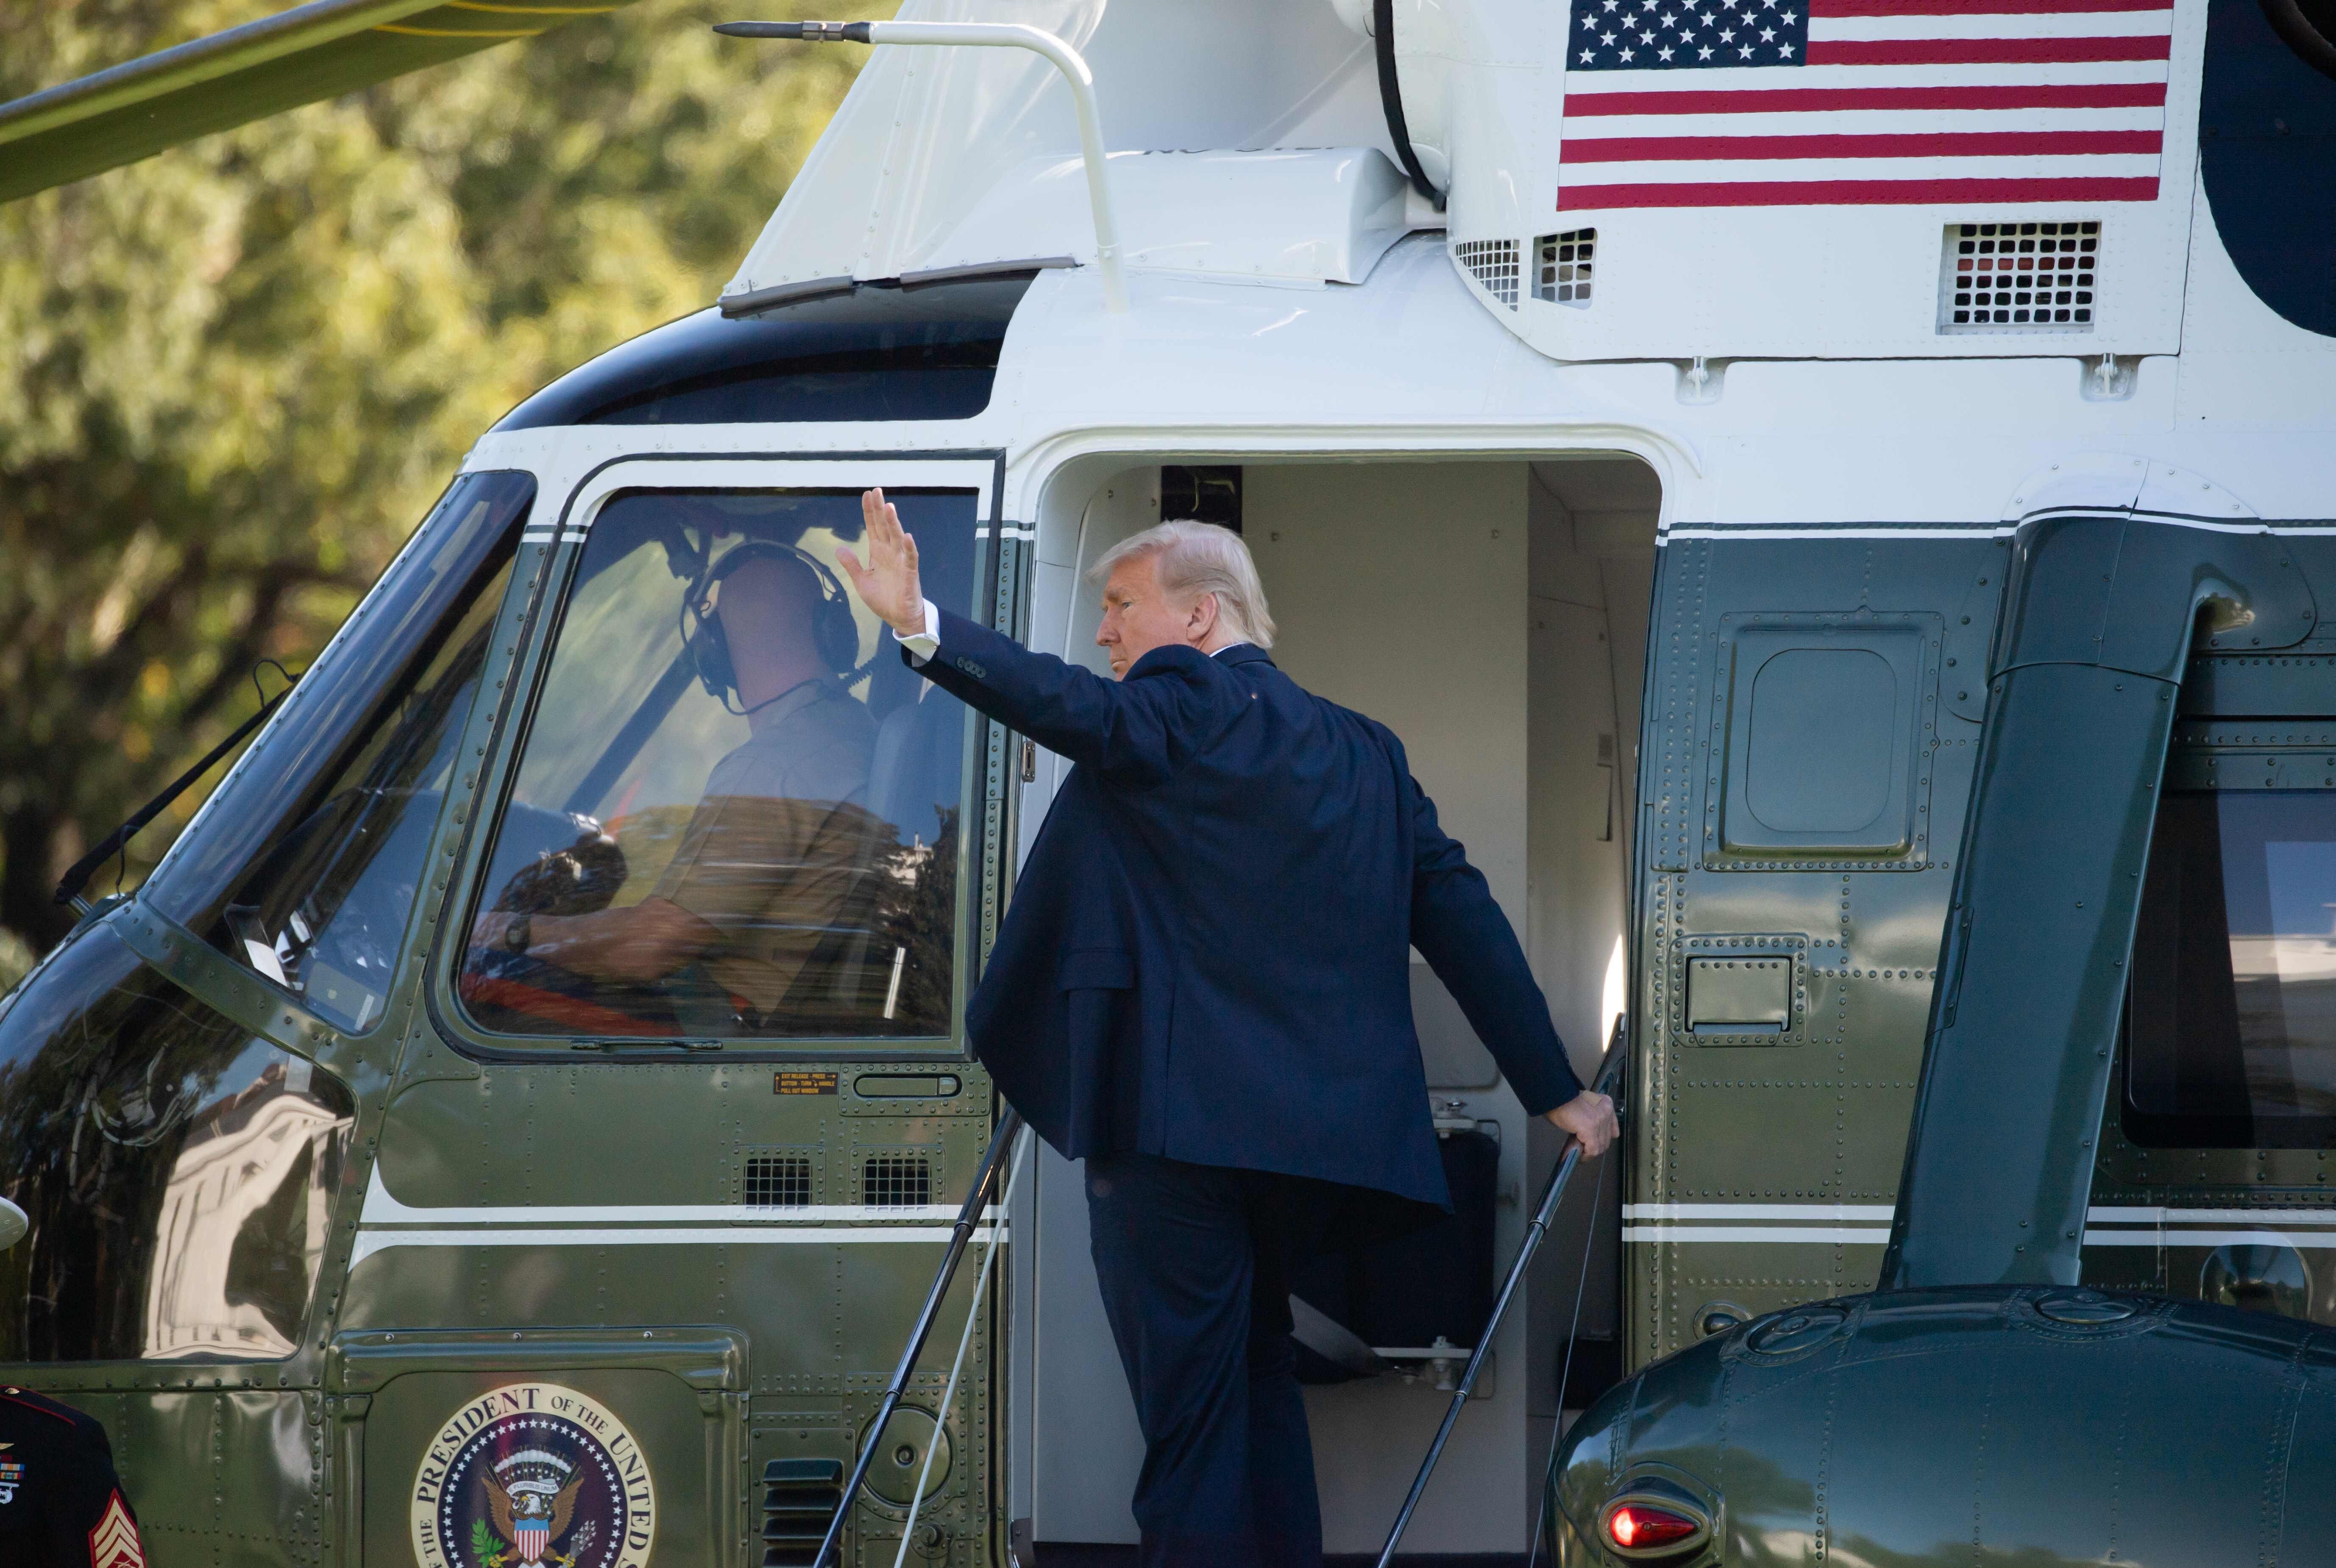 Donald Trump boards Marine One as he leaves departs the White House in Washington, on October 14, 2020. Photo: AFP